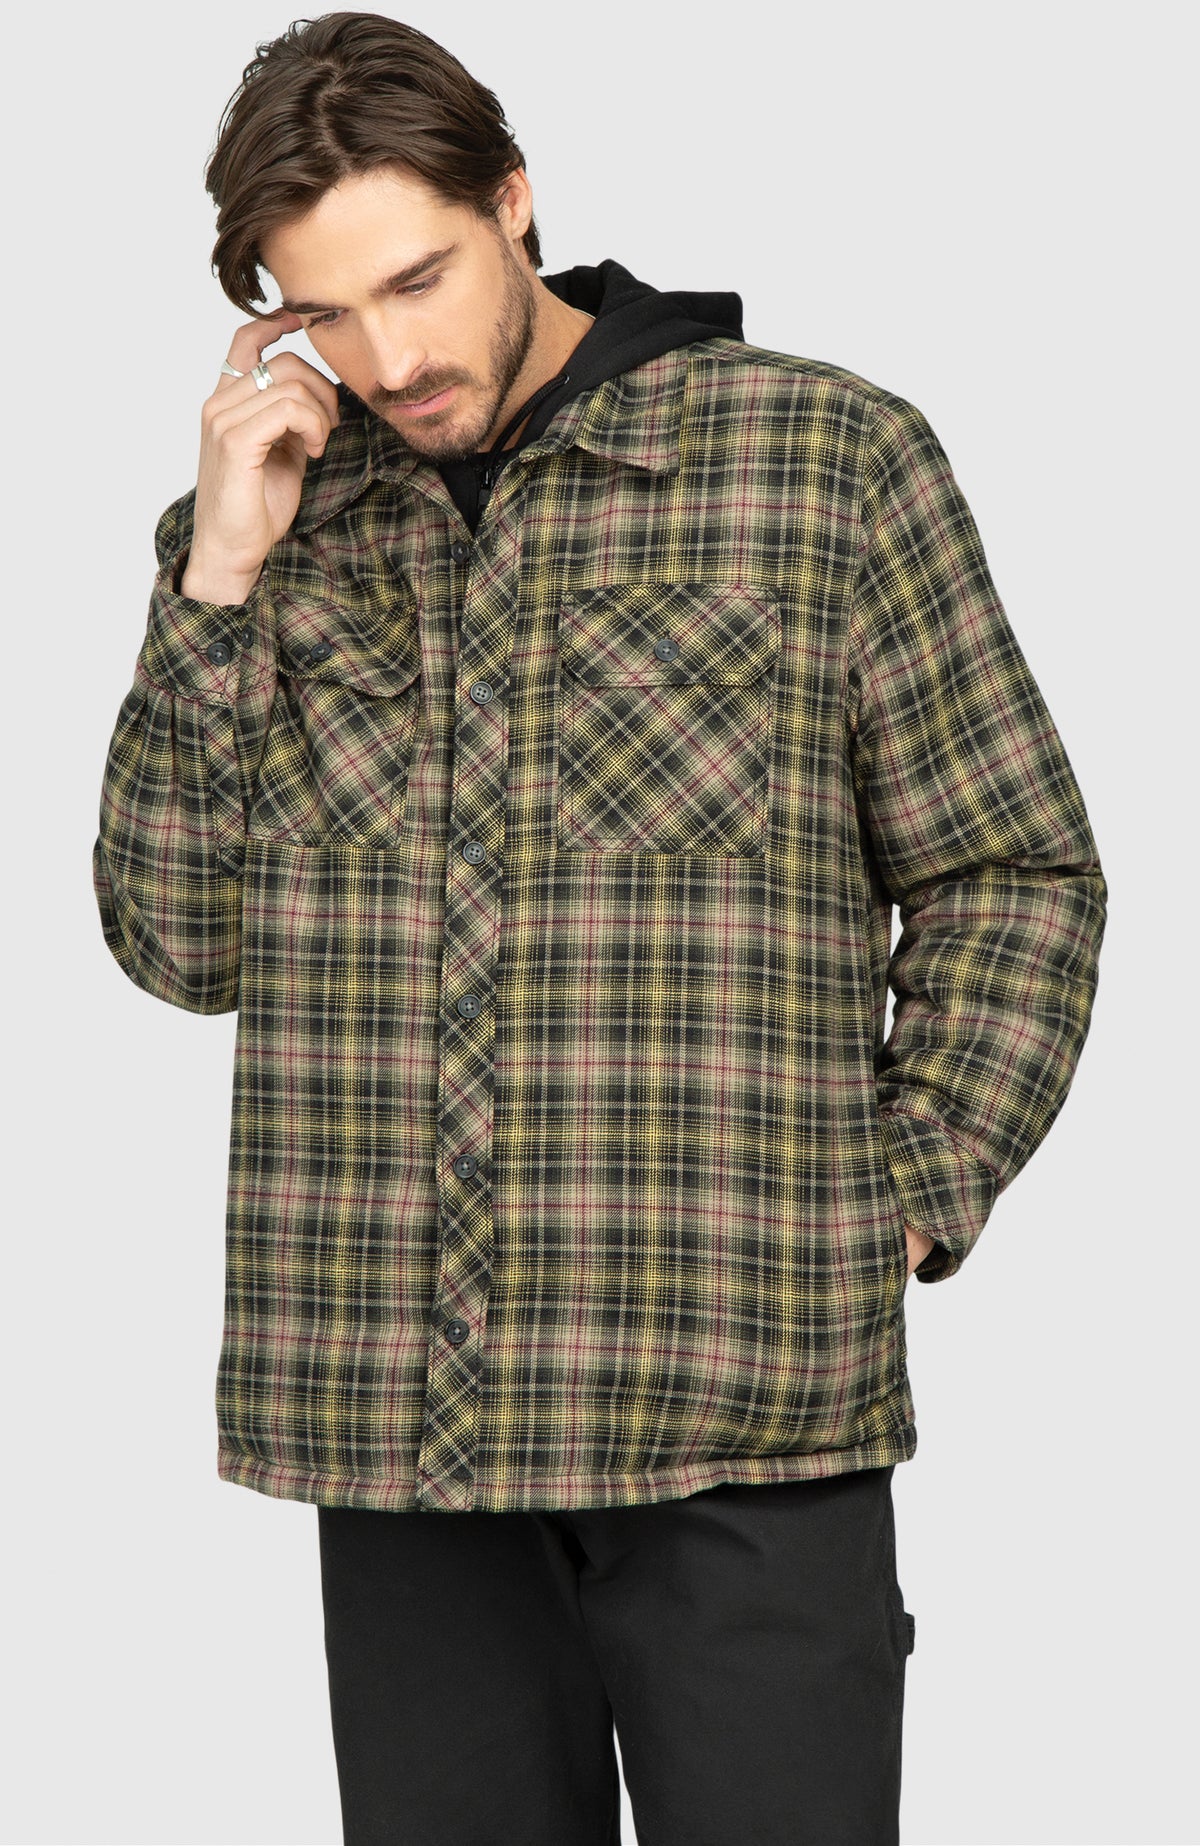 Black Pine Hooded Flannel Shirt Jacket - Front Buttoned Up